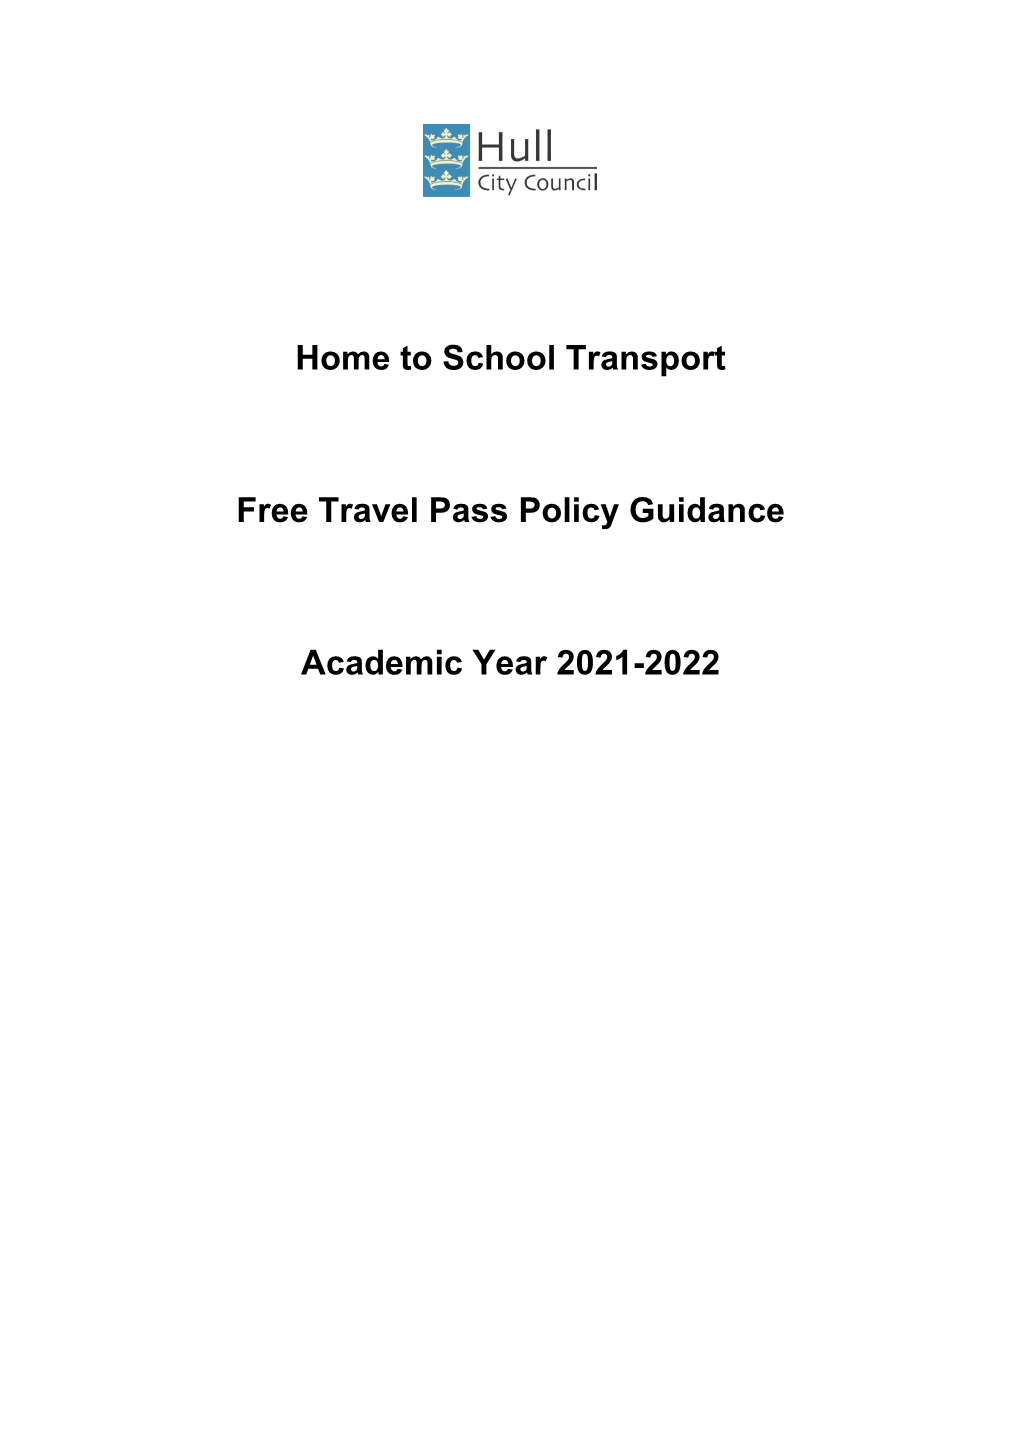 Home to School Transport Free Travel Pass Guidance Updated April 2021